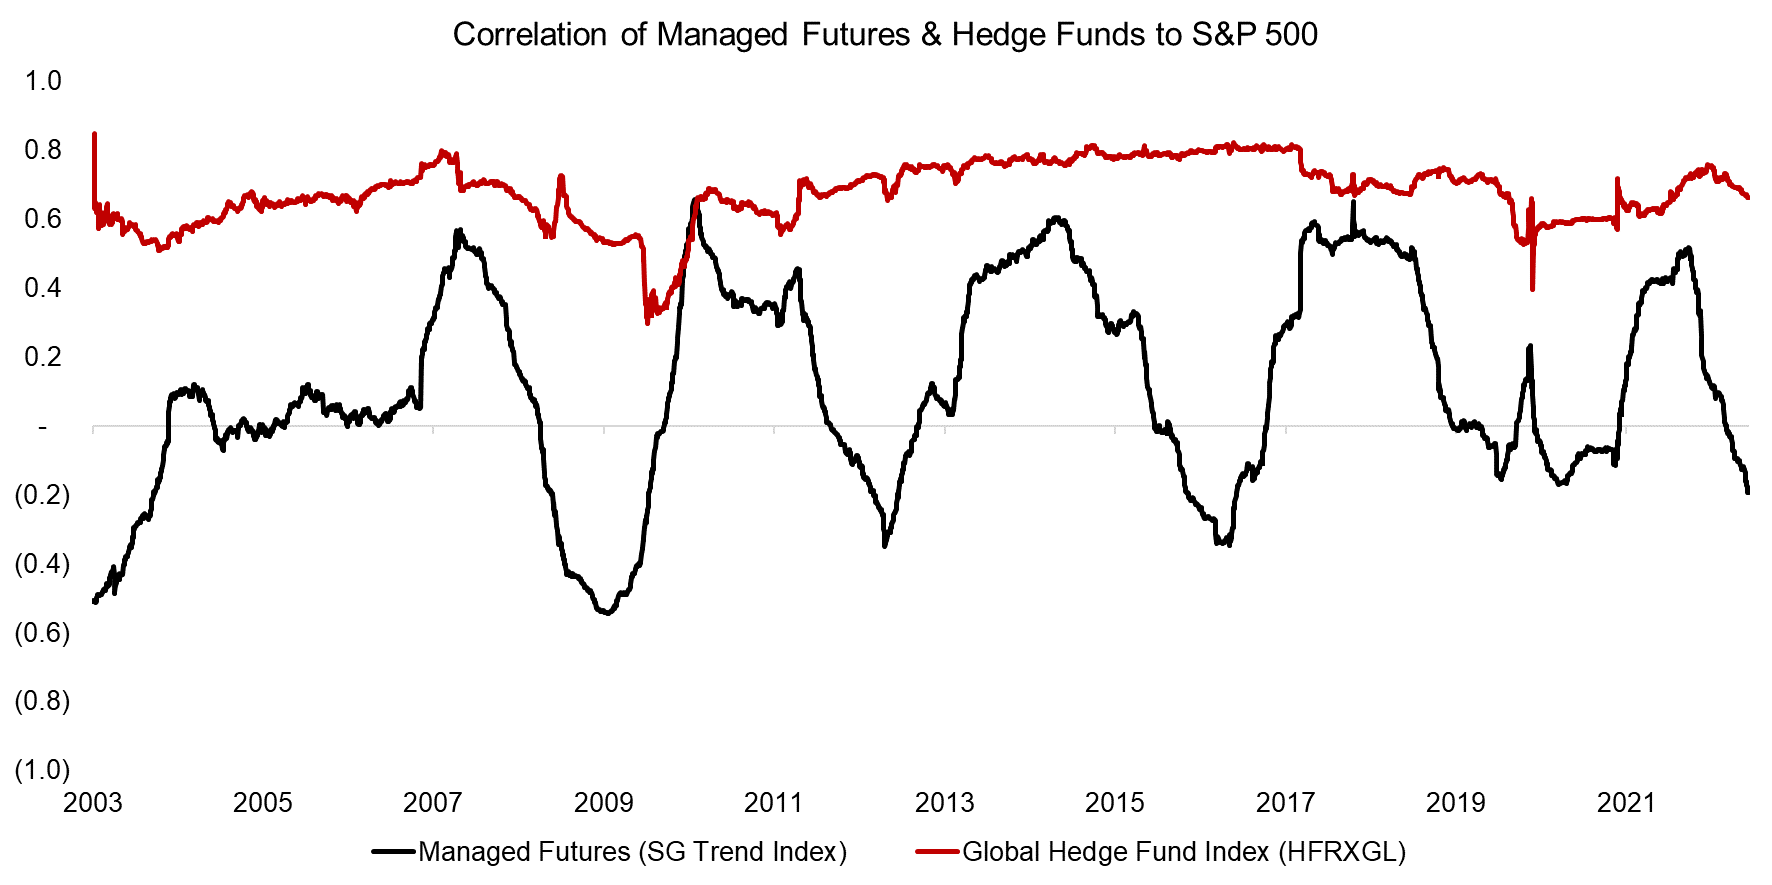 Correlation of Managed Futures & Hedge Funds to S&P 500